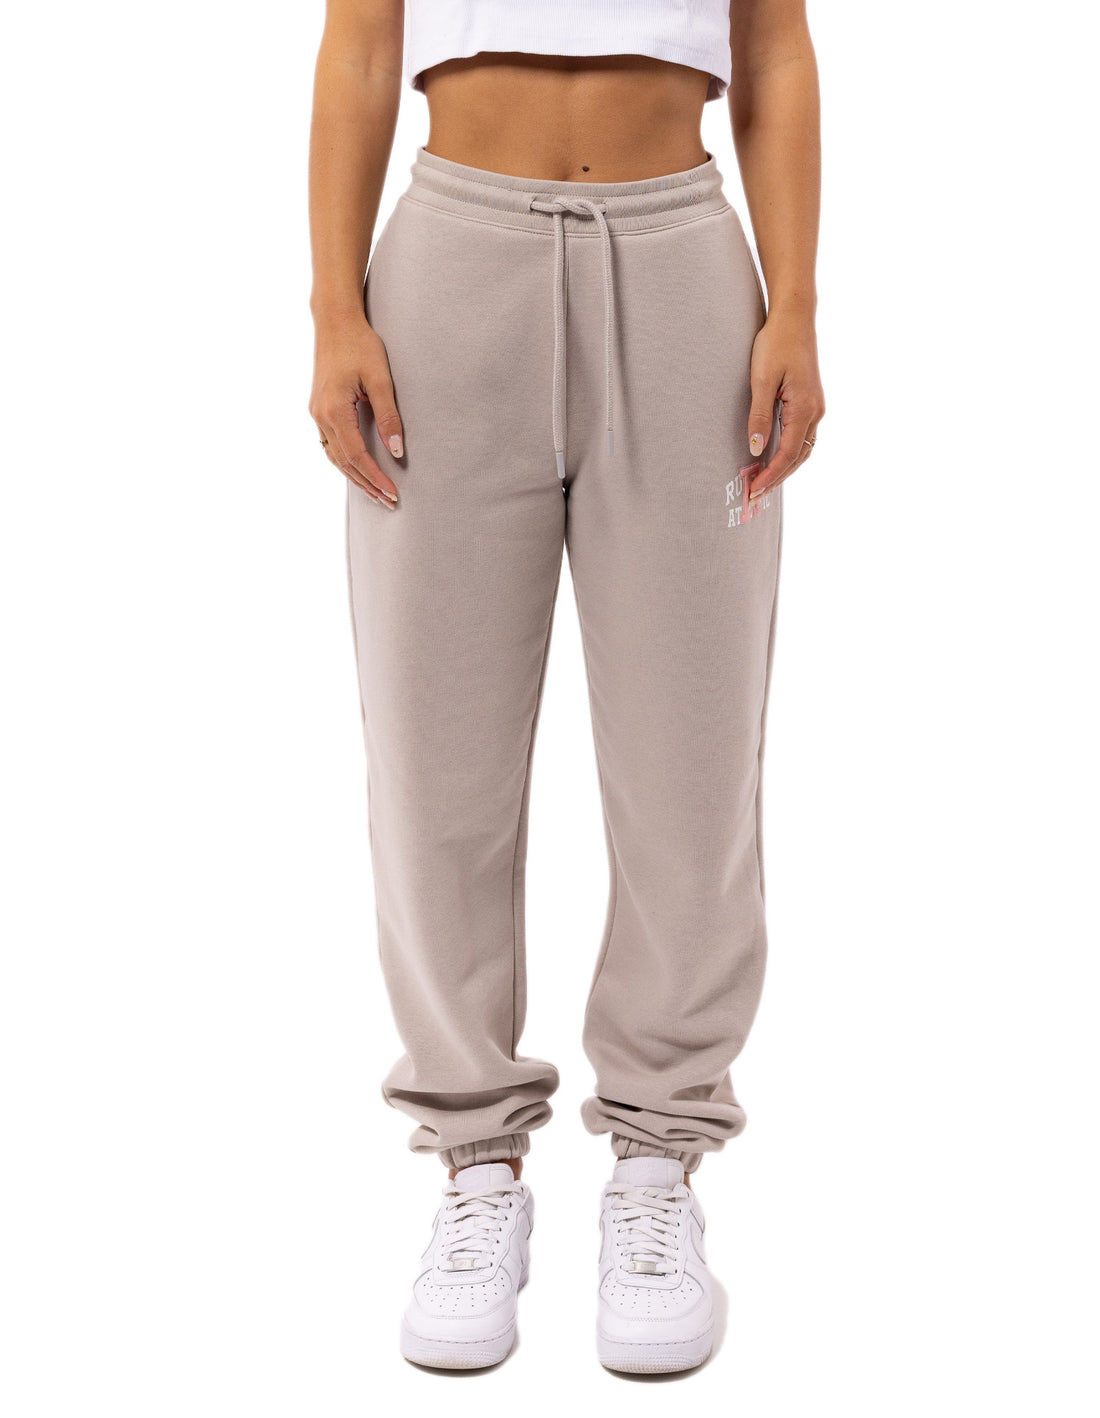 RUSSELL ATHLETIC "R" TRACK PANT